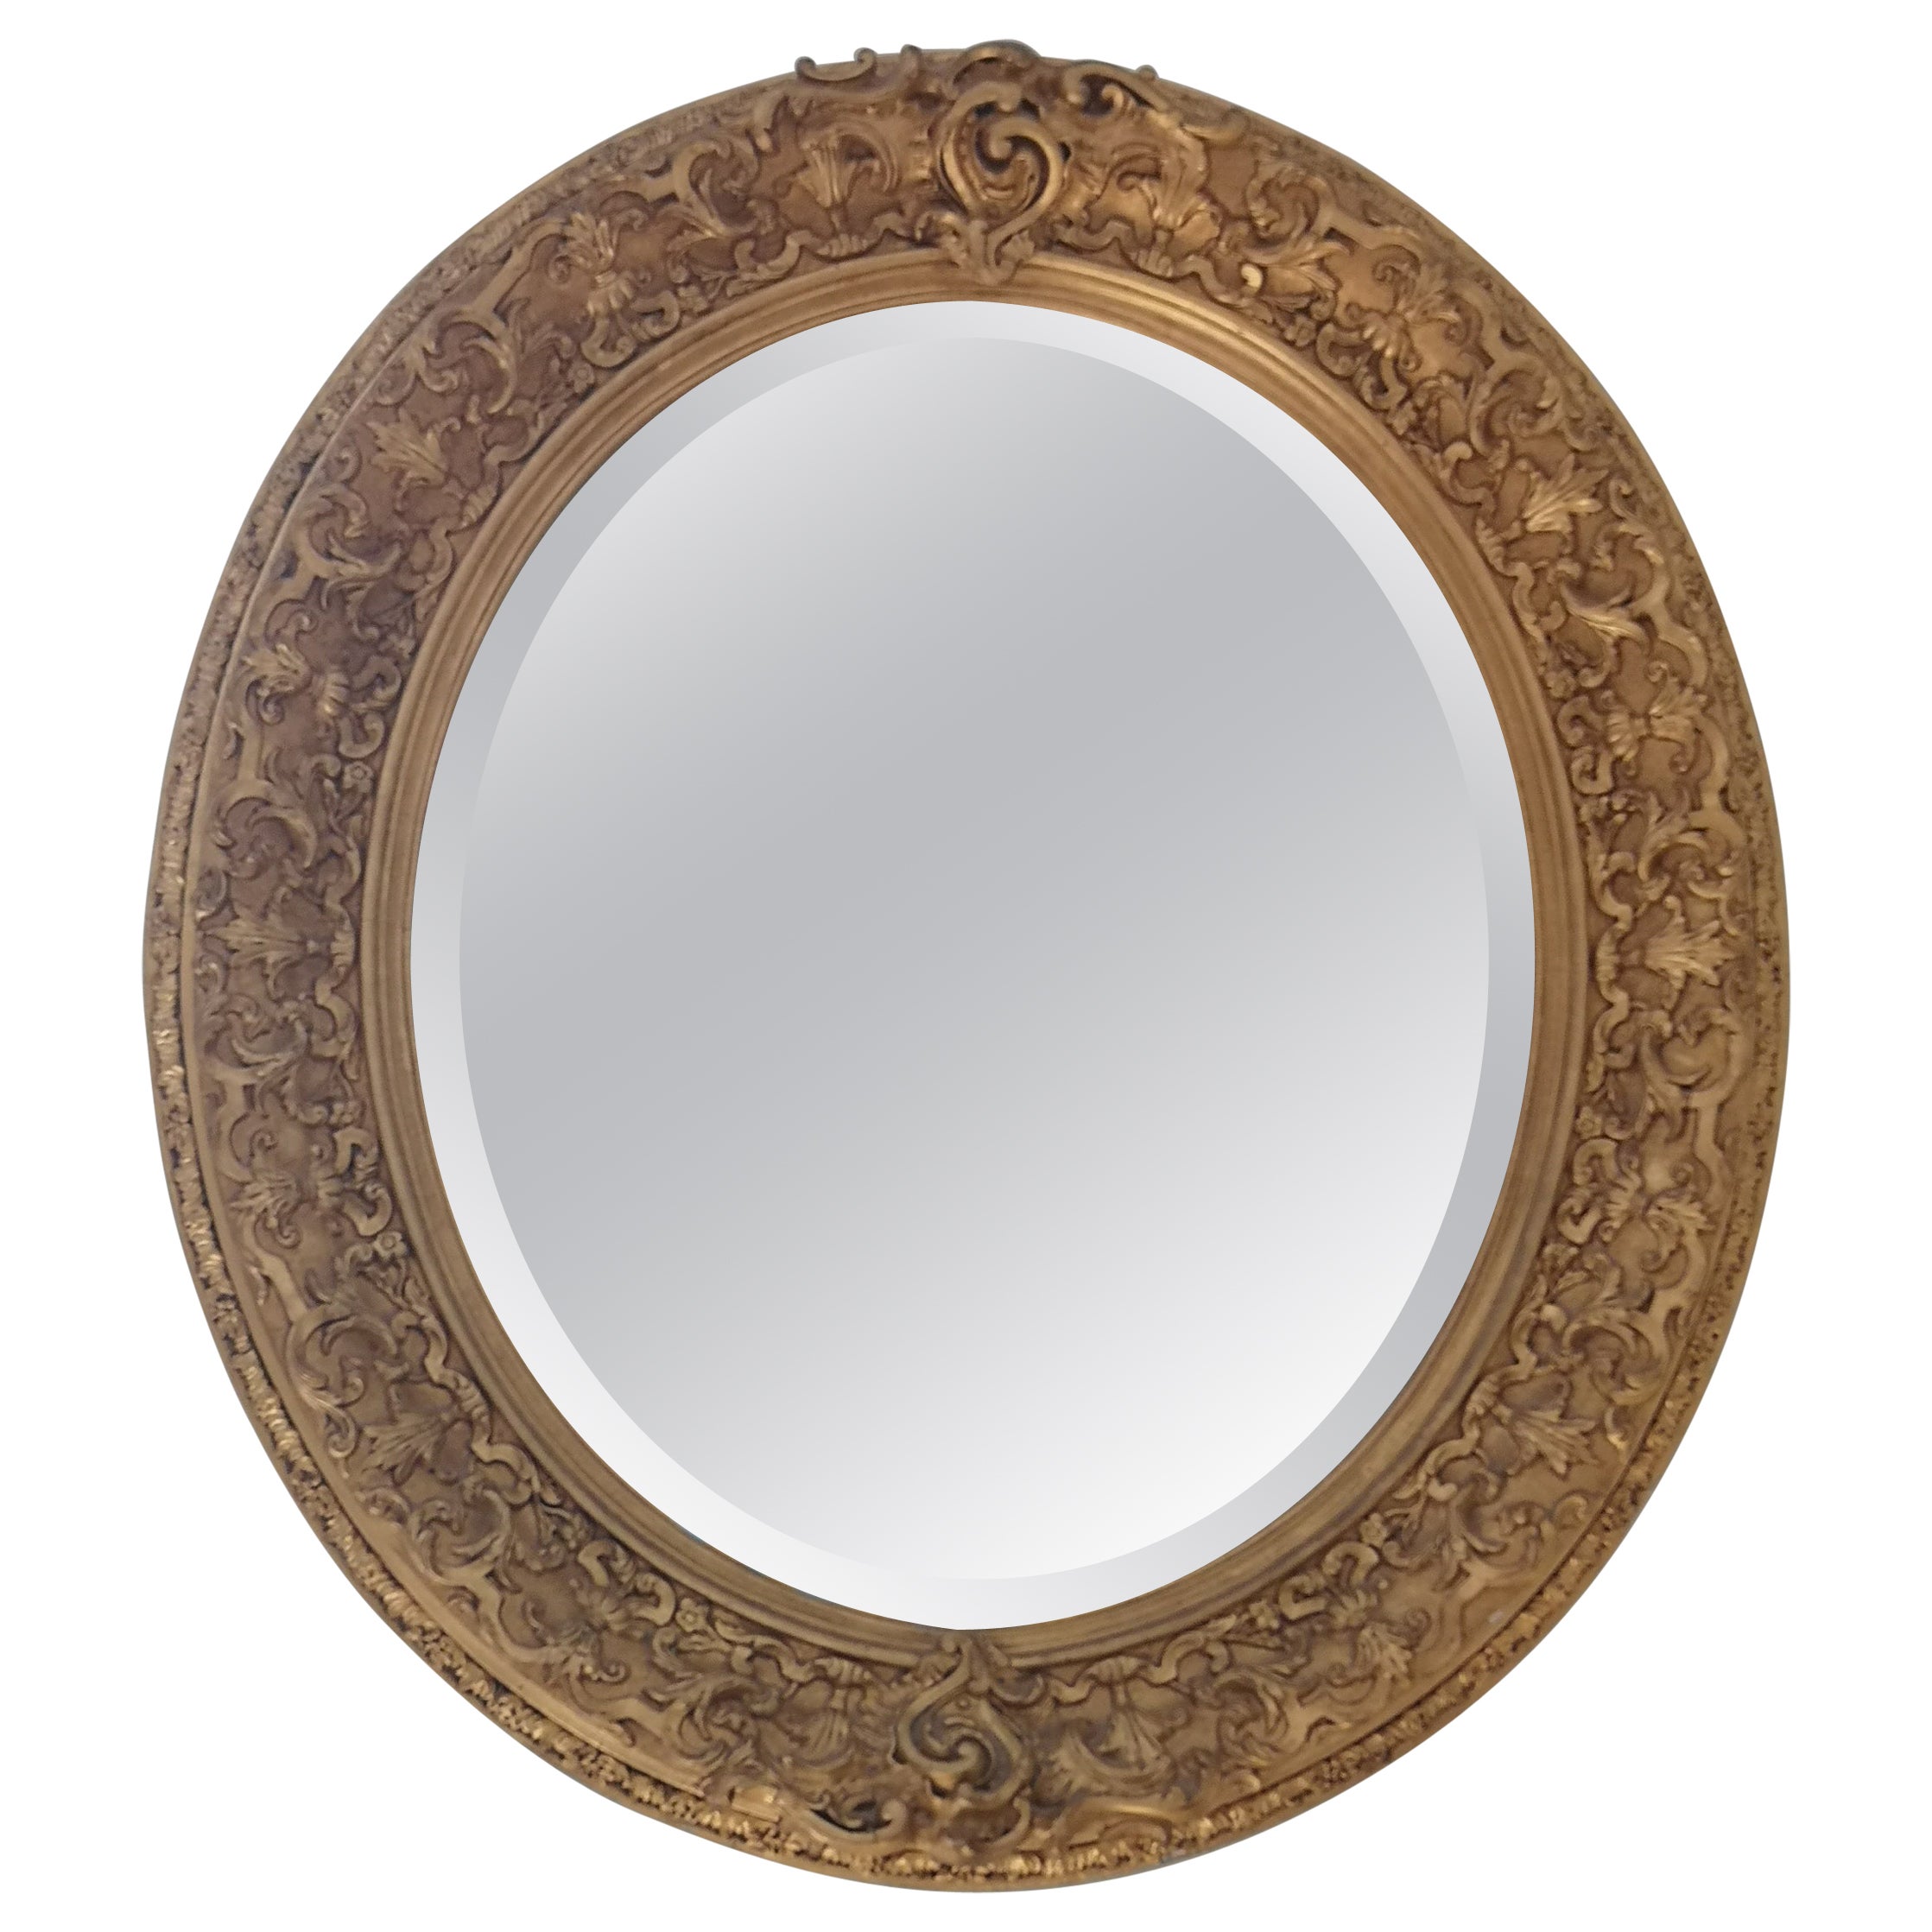 Louis XVI oval mirror in gilded wood and stucco from the 19th century